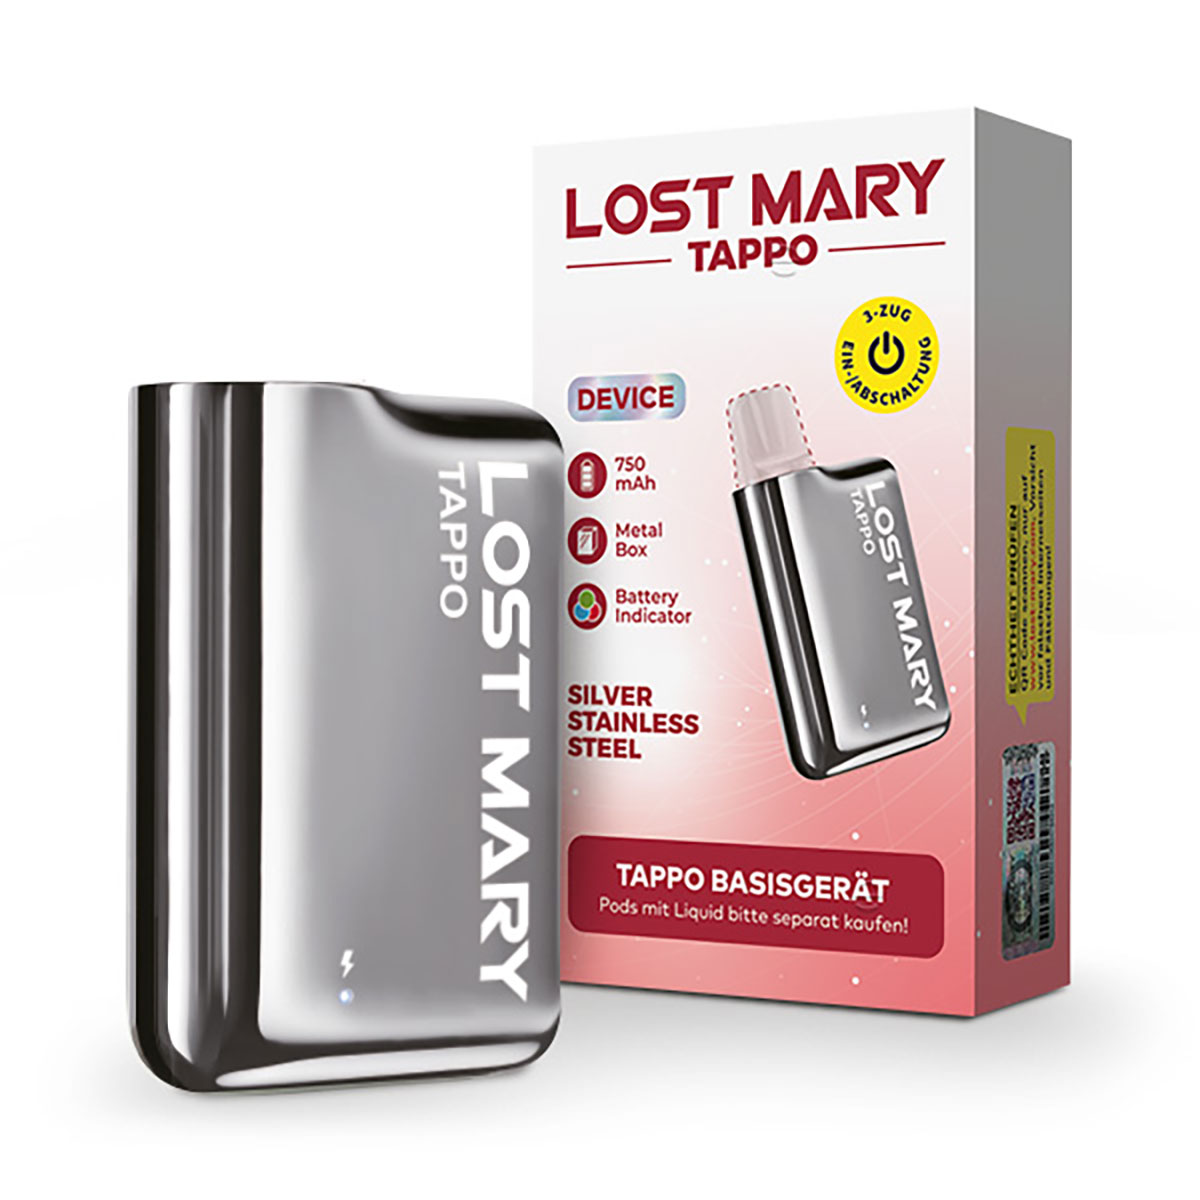 Lost Mary Tappo Silver Stainless Steal Device